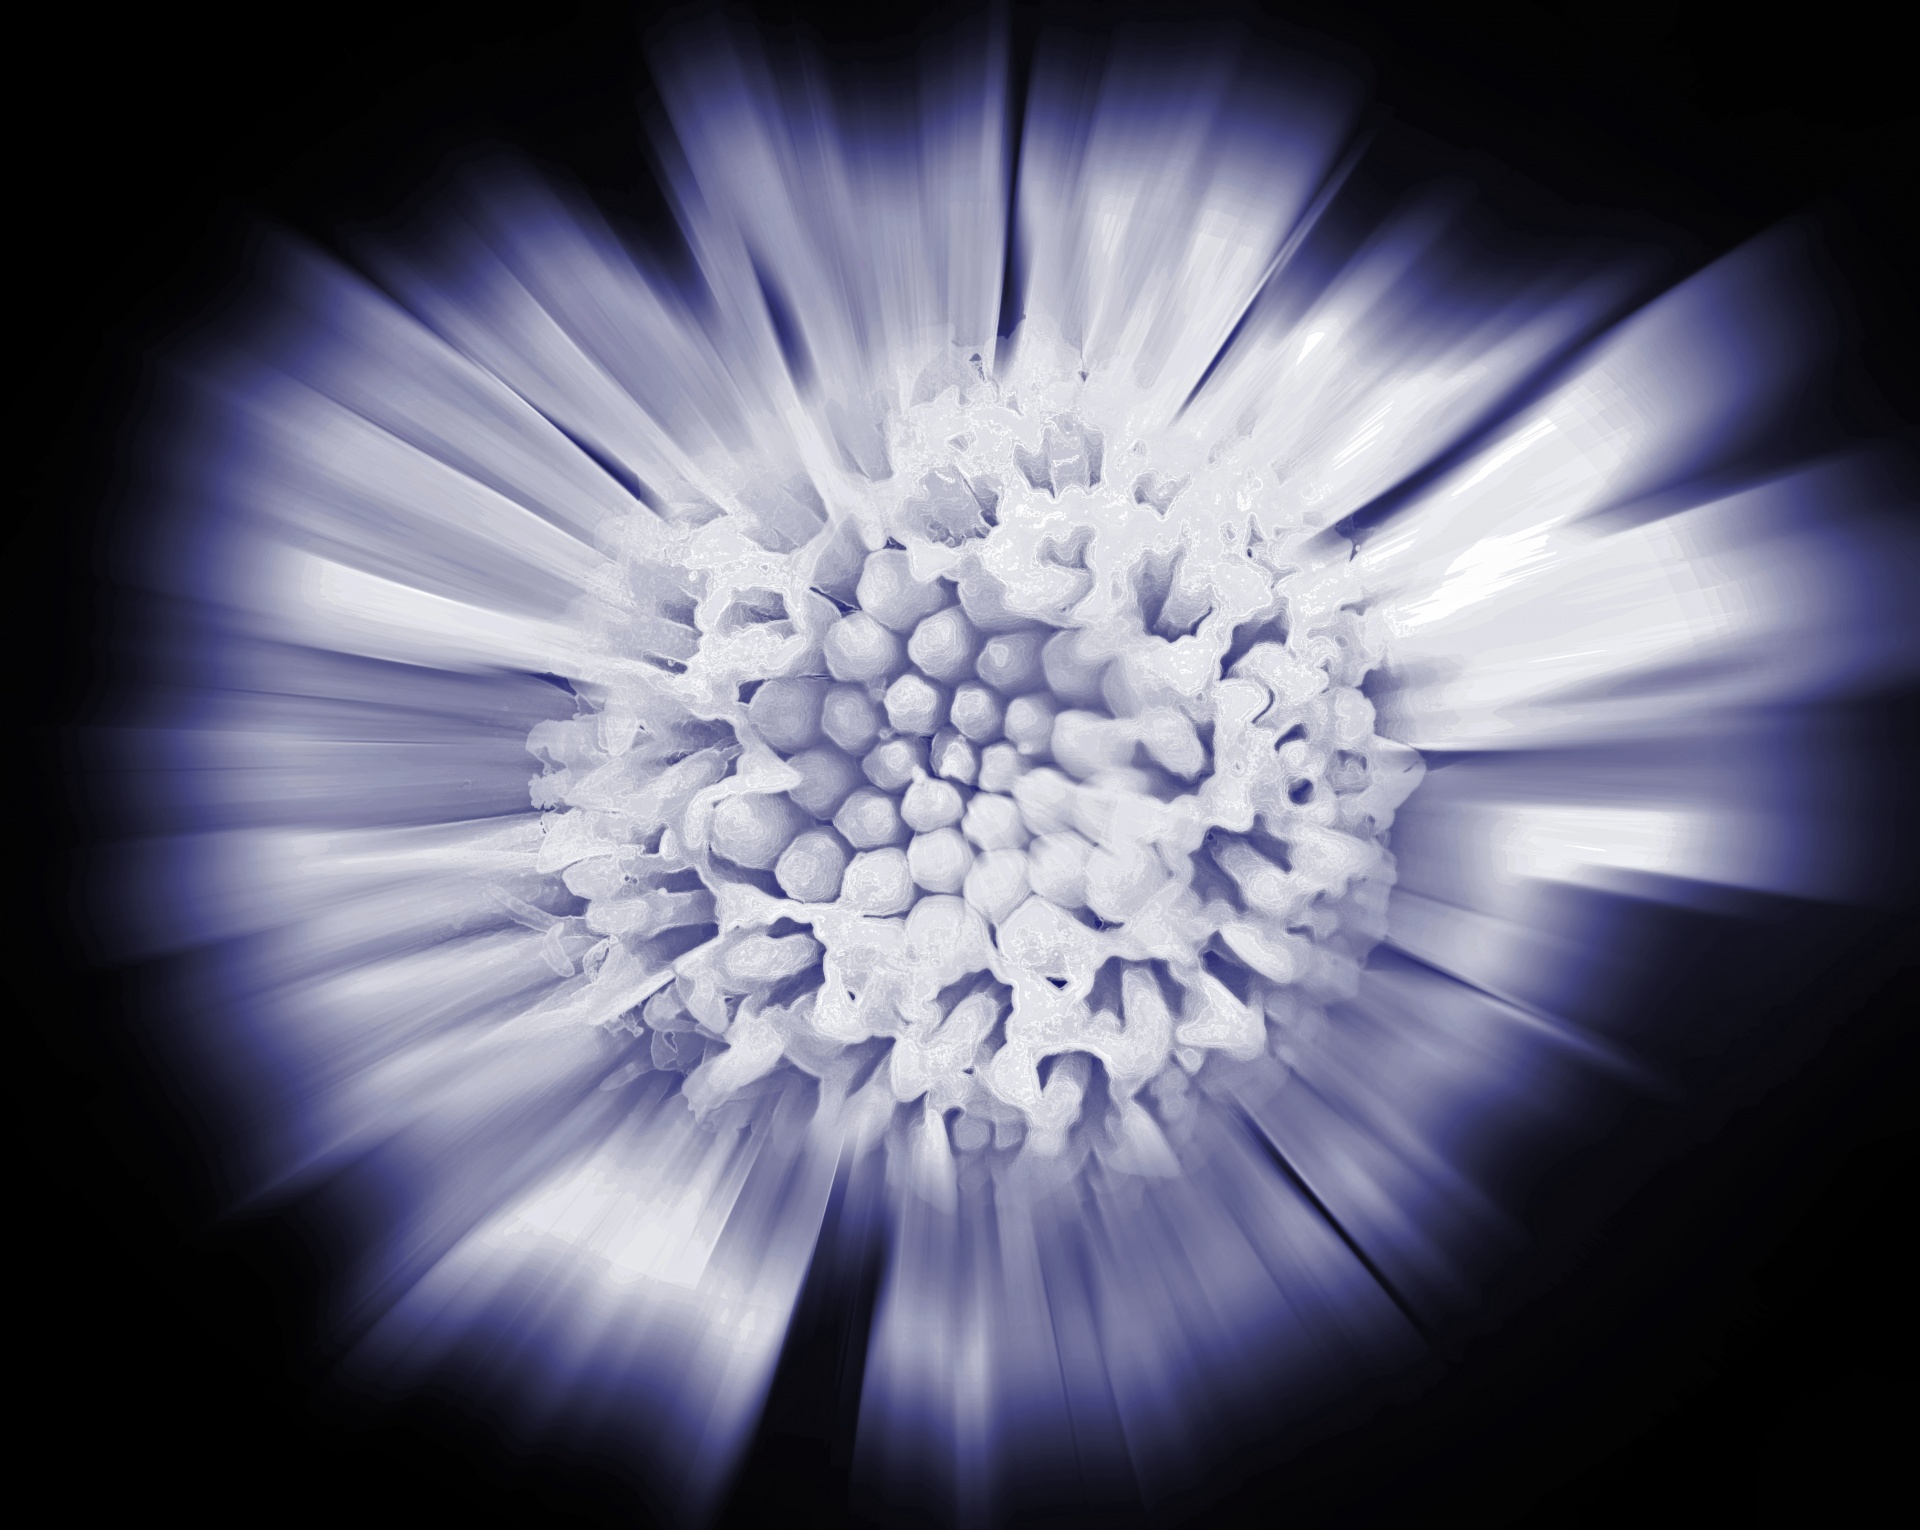 zoom burst image of a flower in indigo blue and white